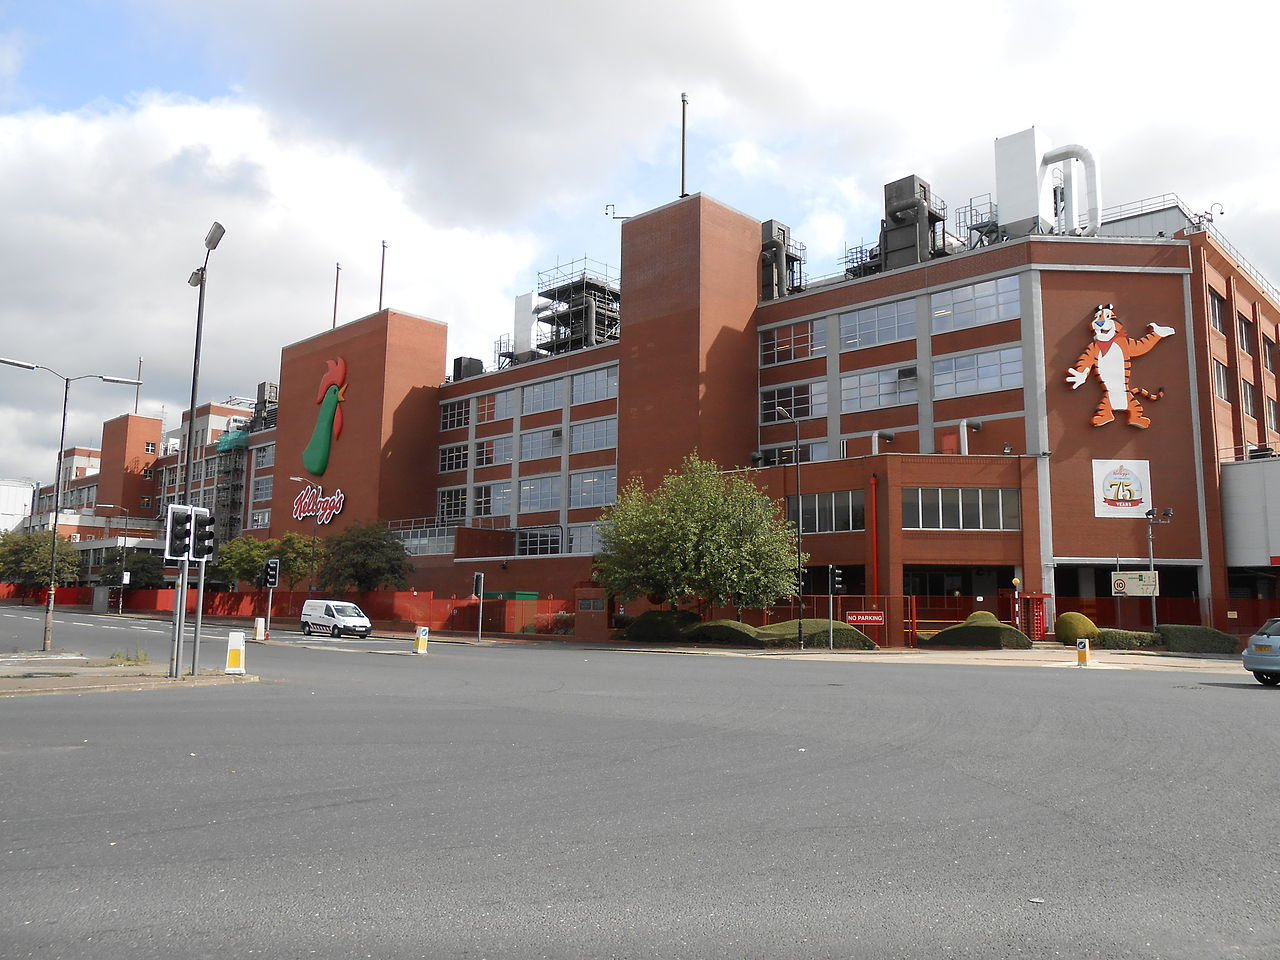 why is kellogg's shutting down trafford park factory?